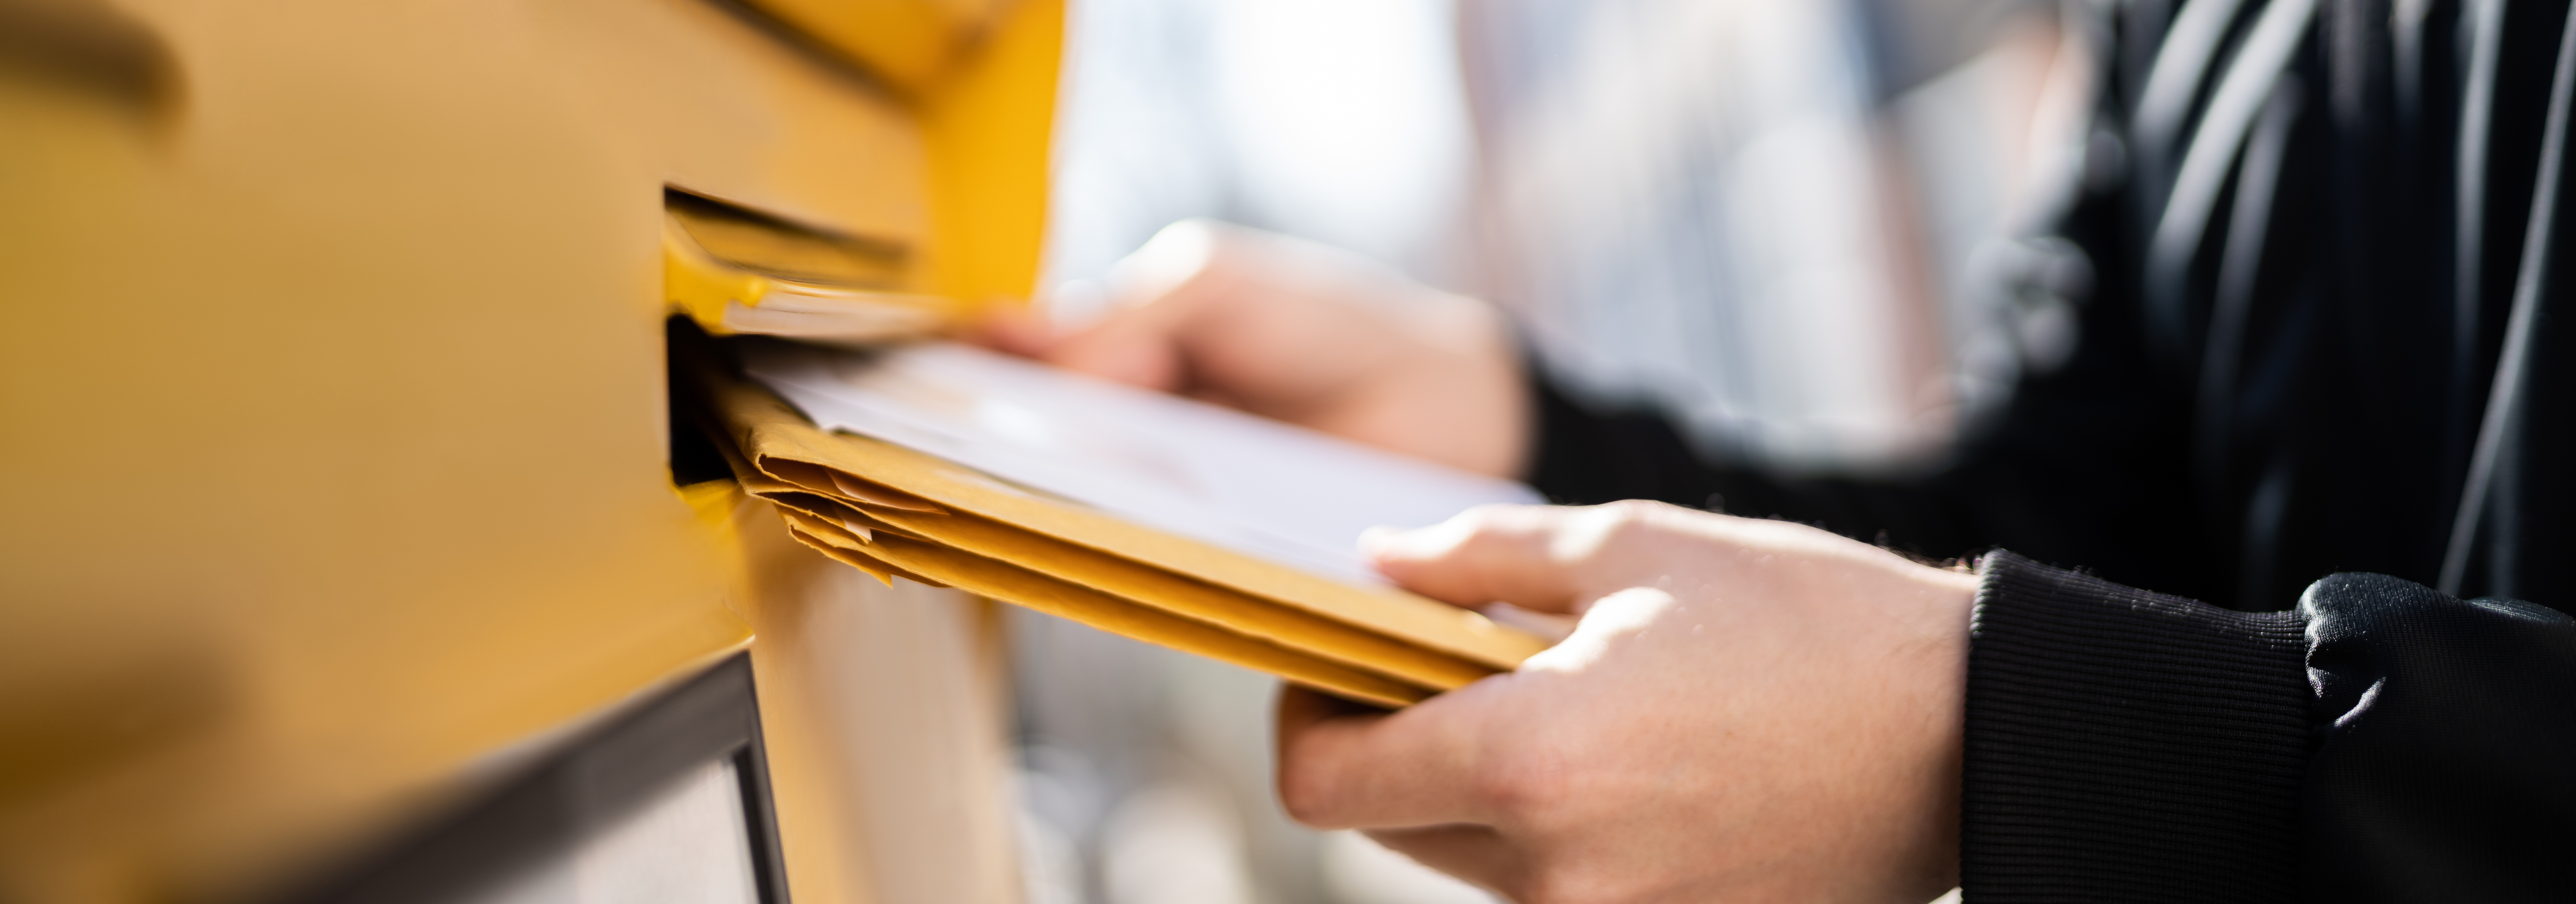 Letter In Envelope Or Document In Mailbox. Man Hand Sending Mail